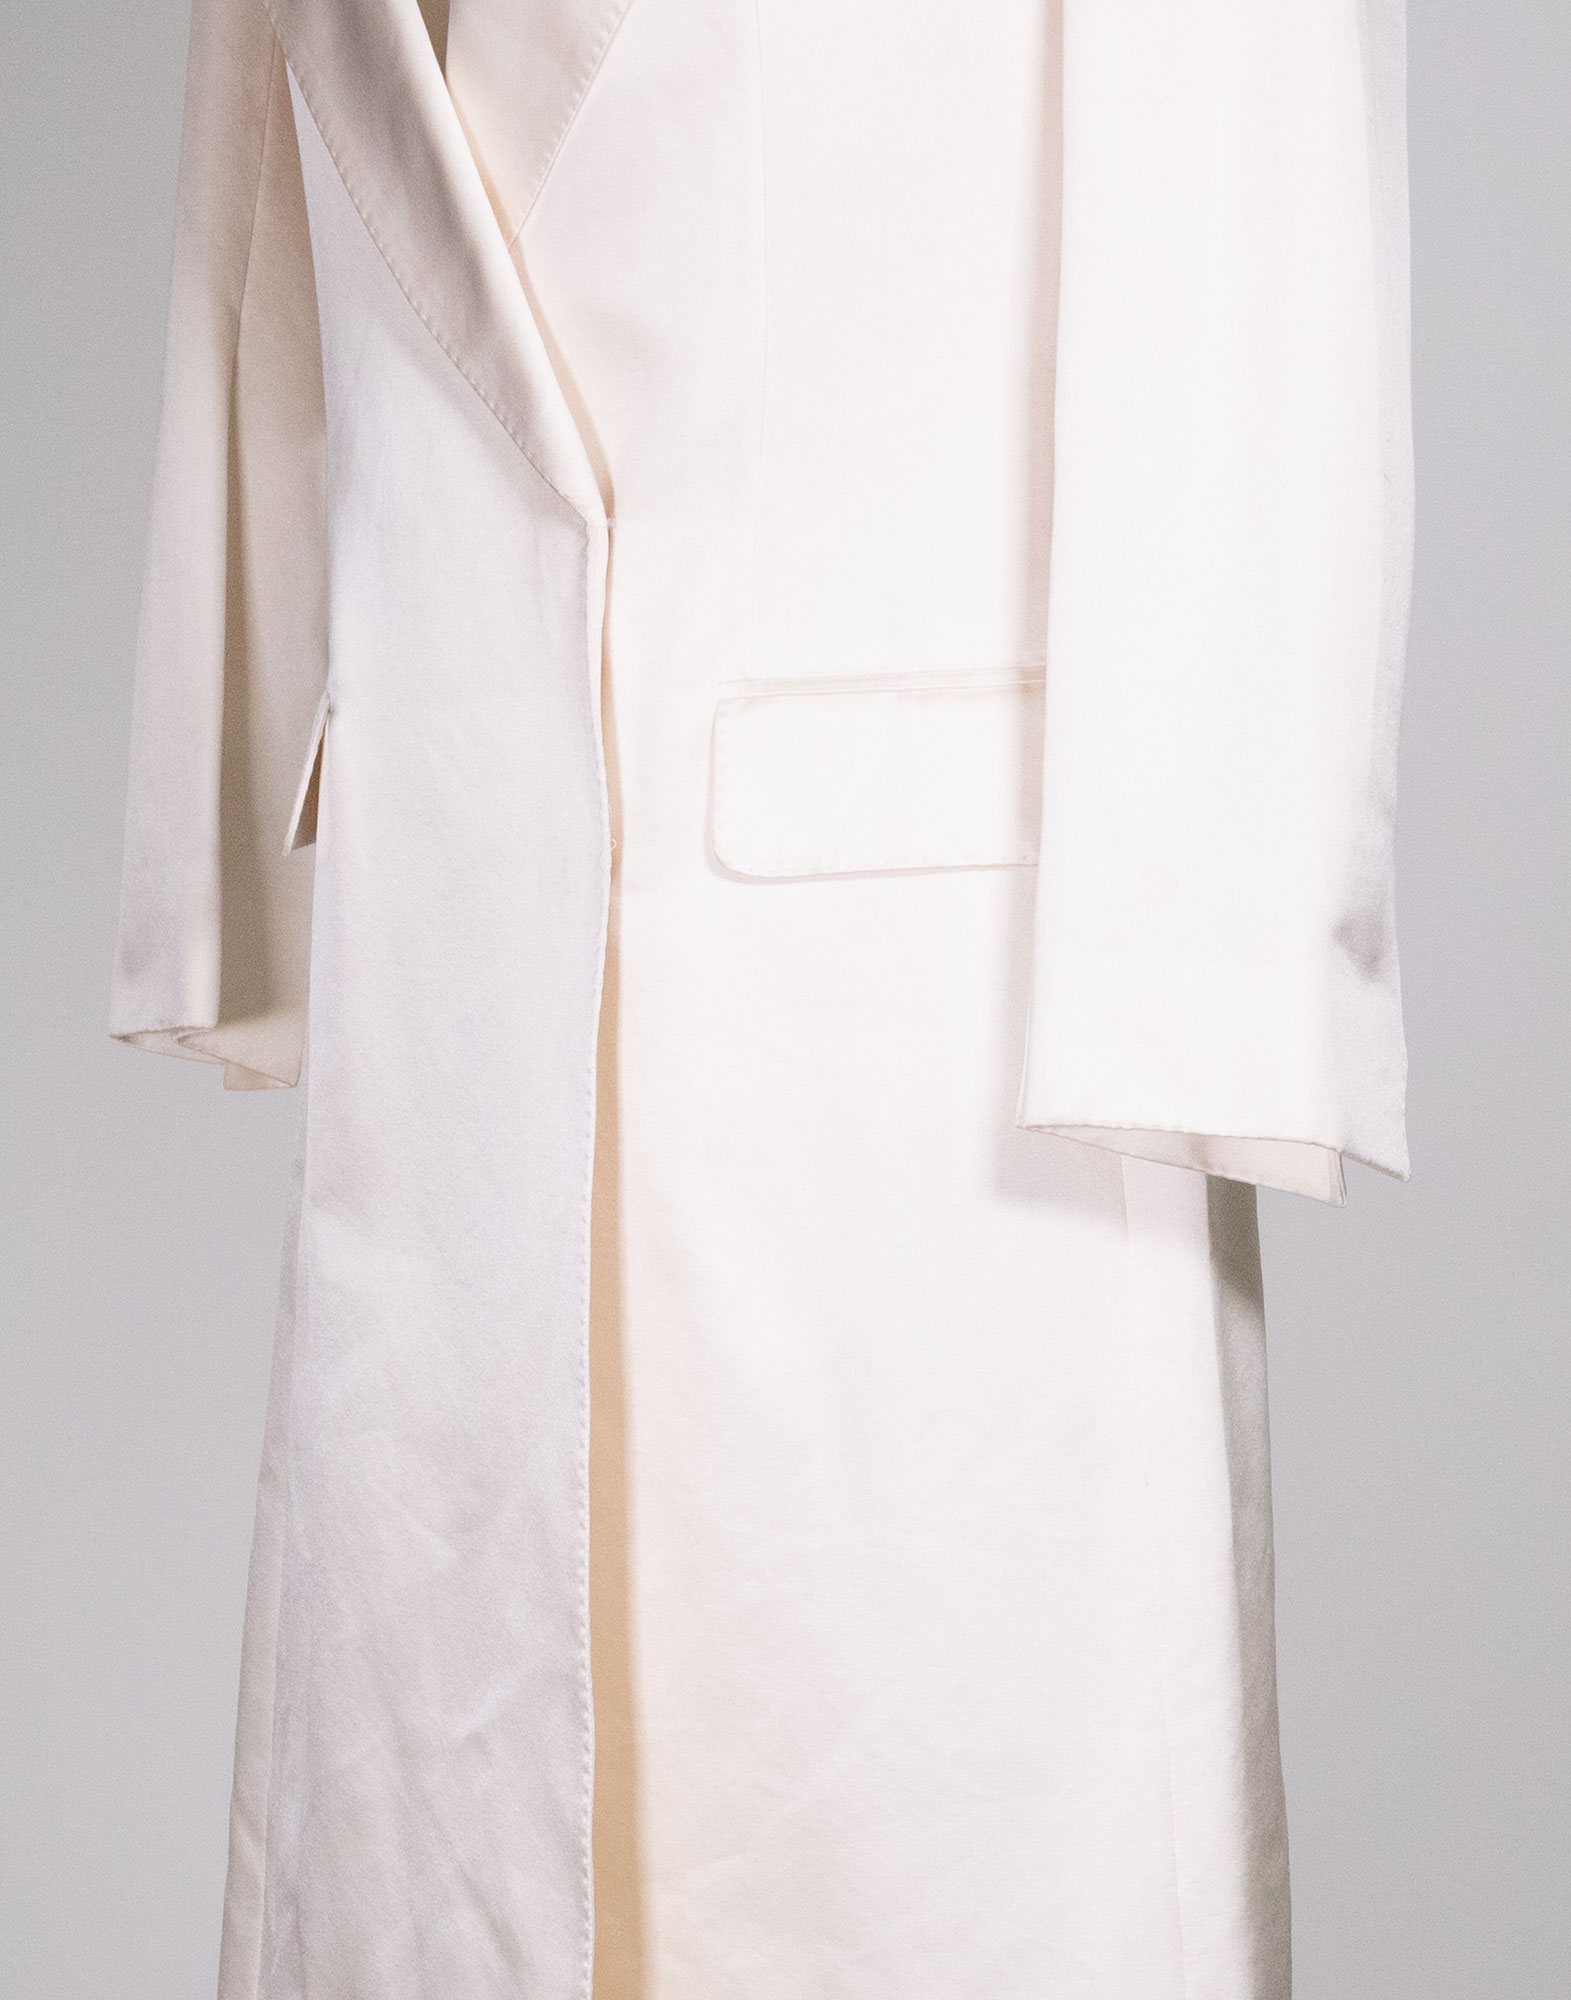 Yves Saint Laurent - 90s Cotton and silk trench coat